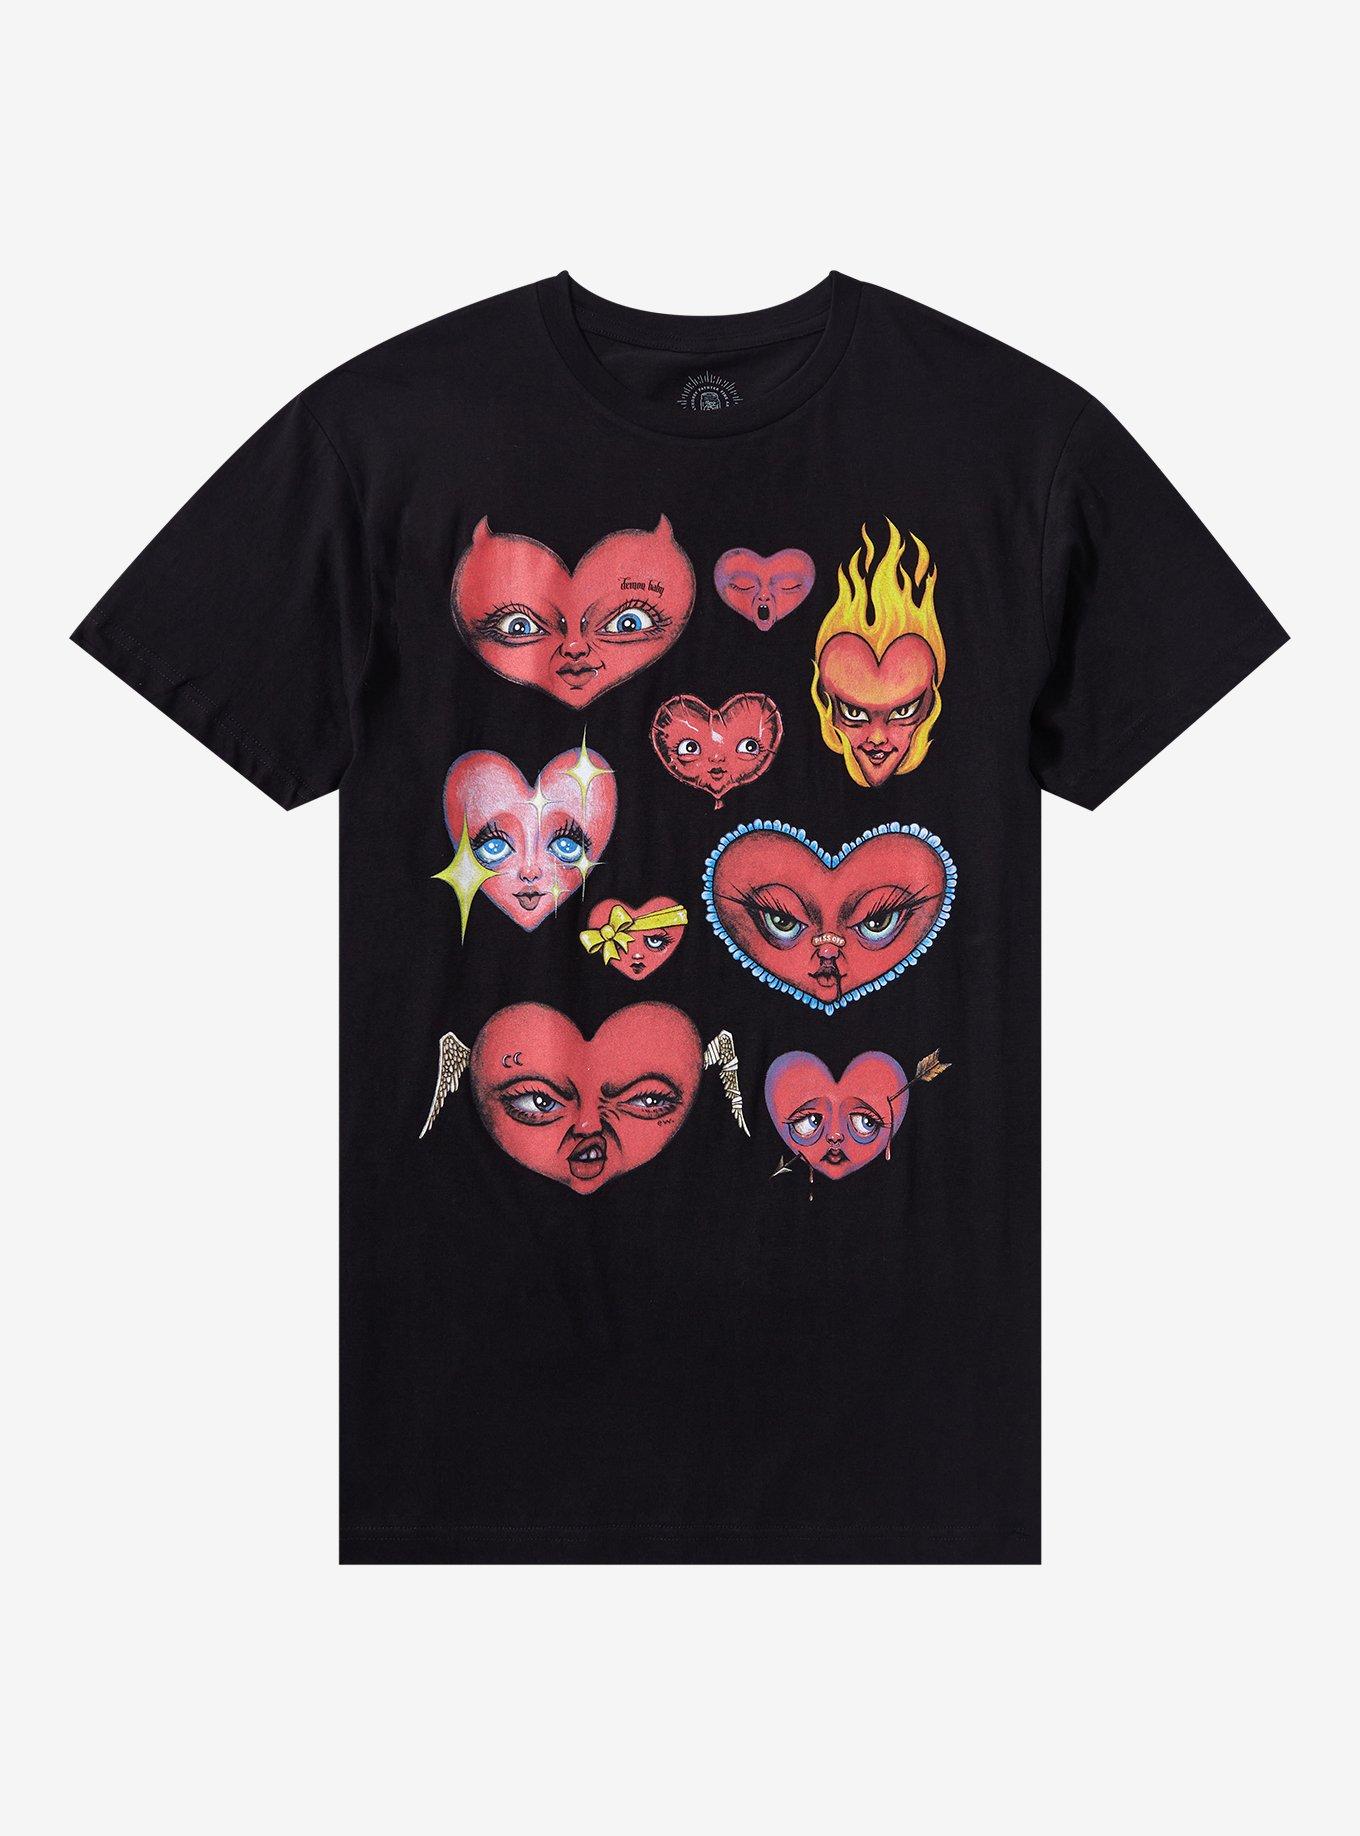 Heart Faces T-Shirt By Lyndsey Paynter, BLACK, hi-res